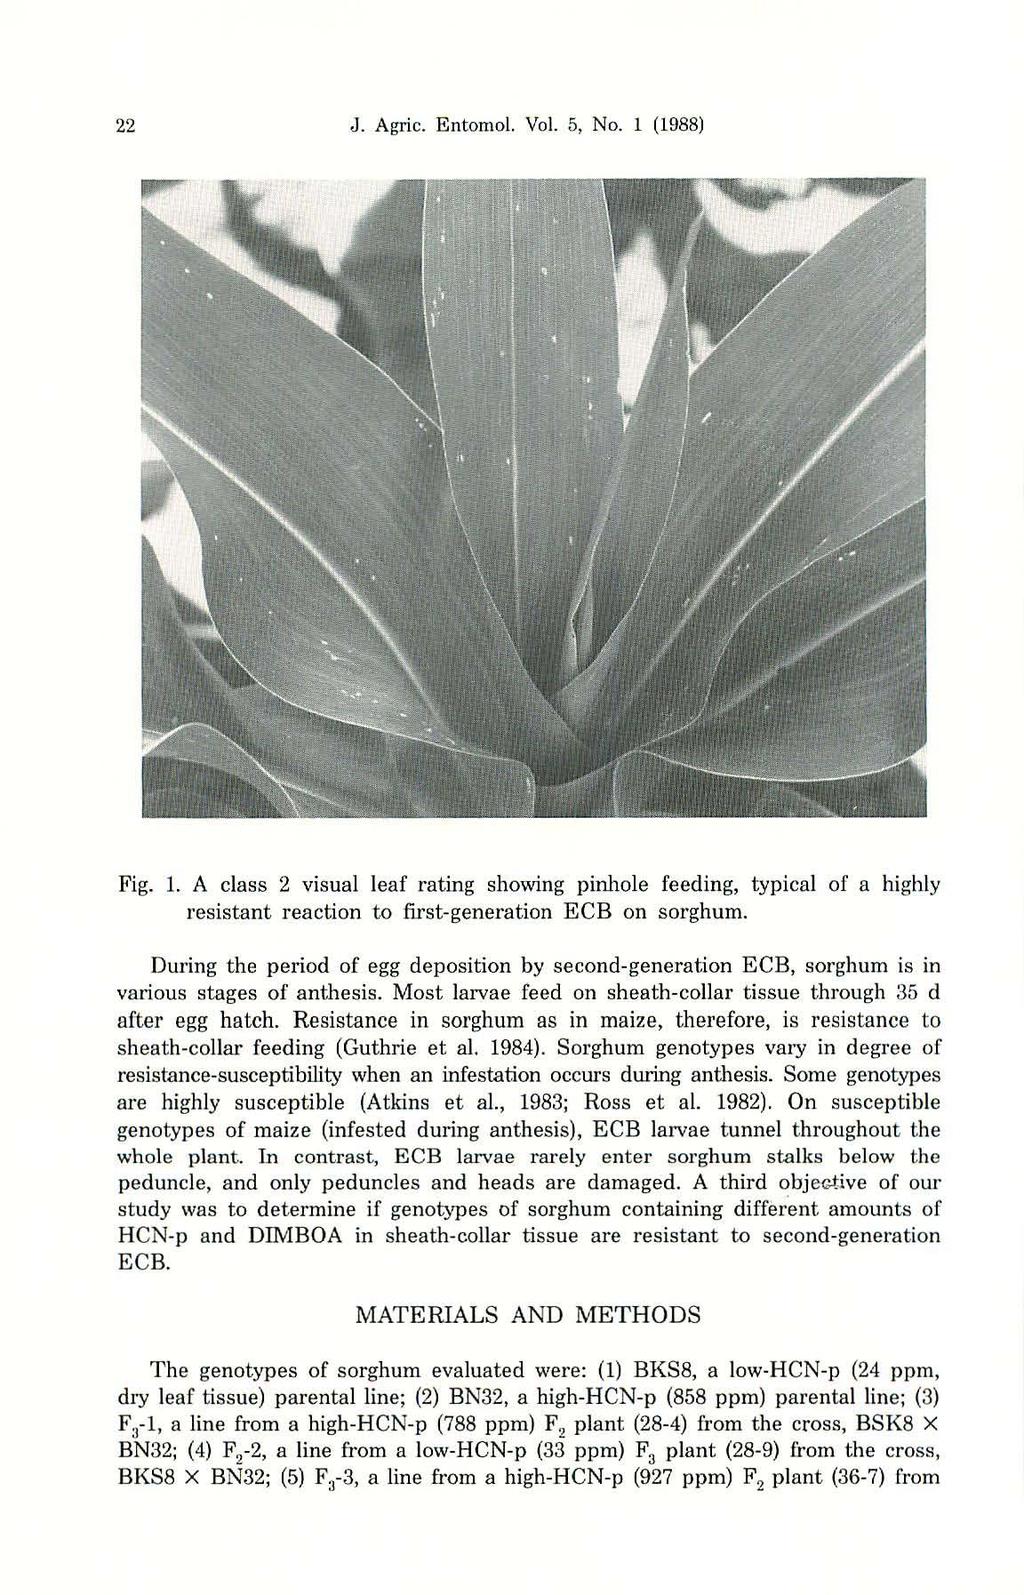 22 J. Agric. Entomol. Vol. 5, No.1 (1988) Fig. 1. A class 2 visual leaf rating showing pinhole feeding, typical of a highly resistant reaction to first-generation ECB on sorghum.